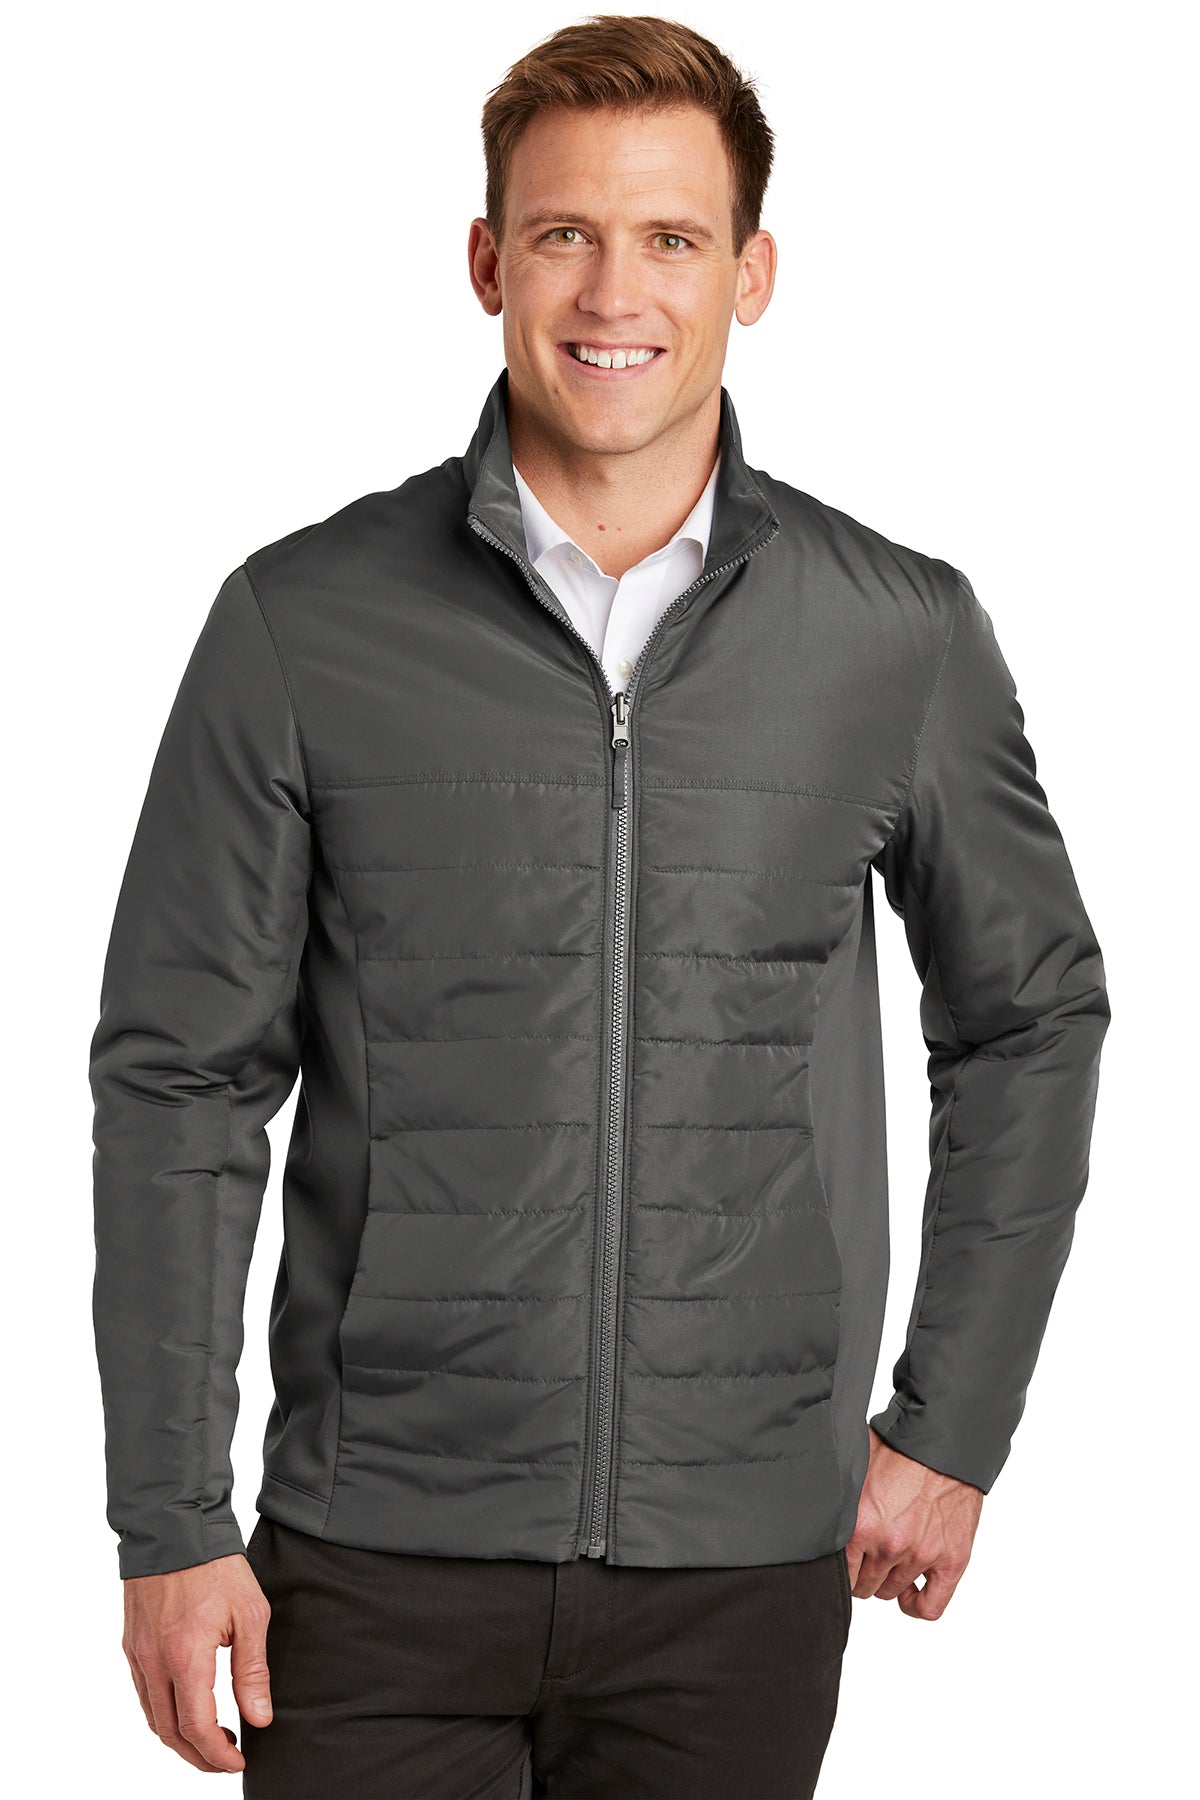 Windsor - Collective Insulated Jacket with W - Graphite - Southern Grace Creations